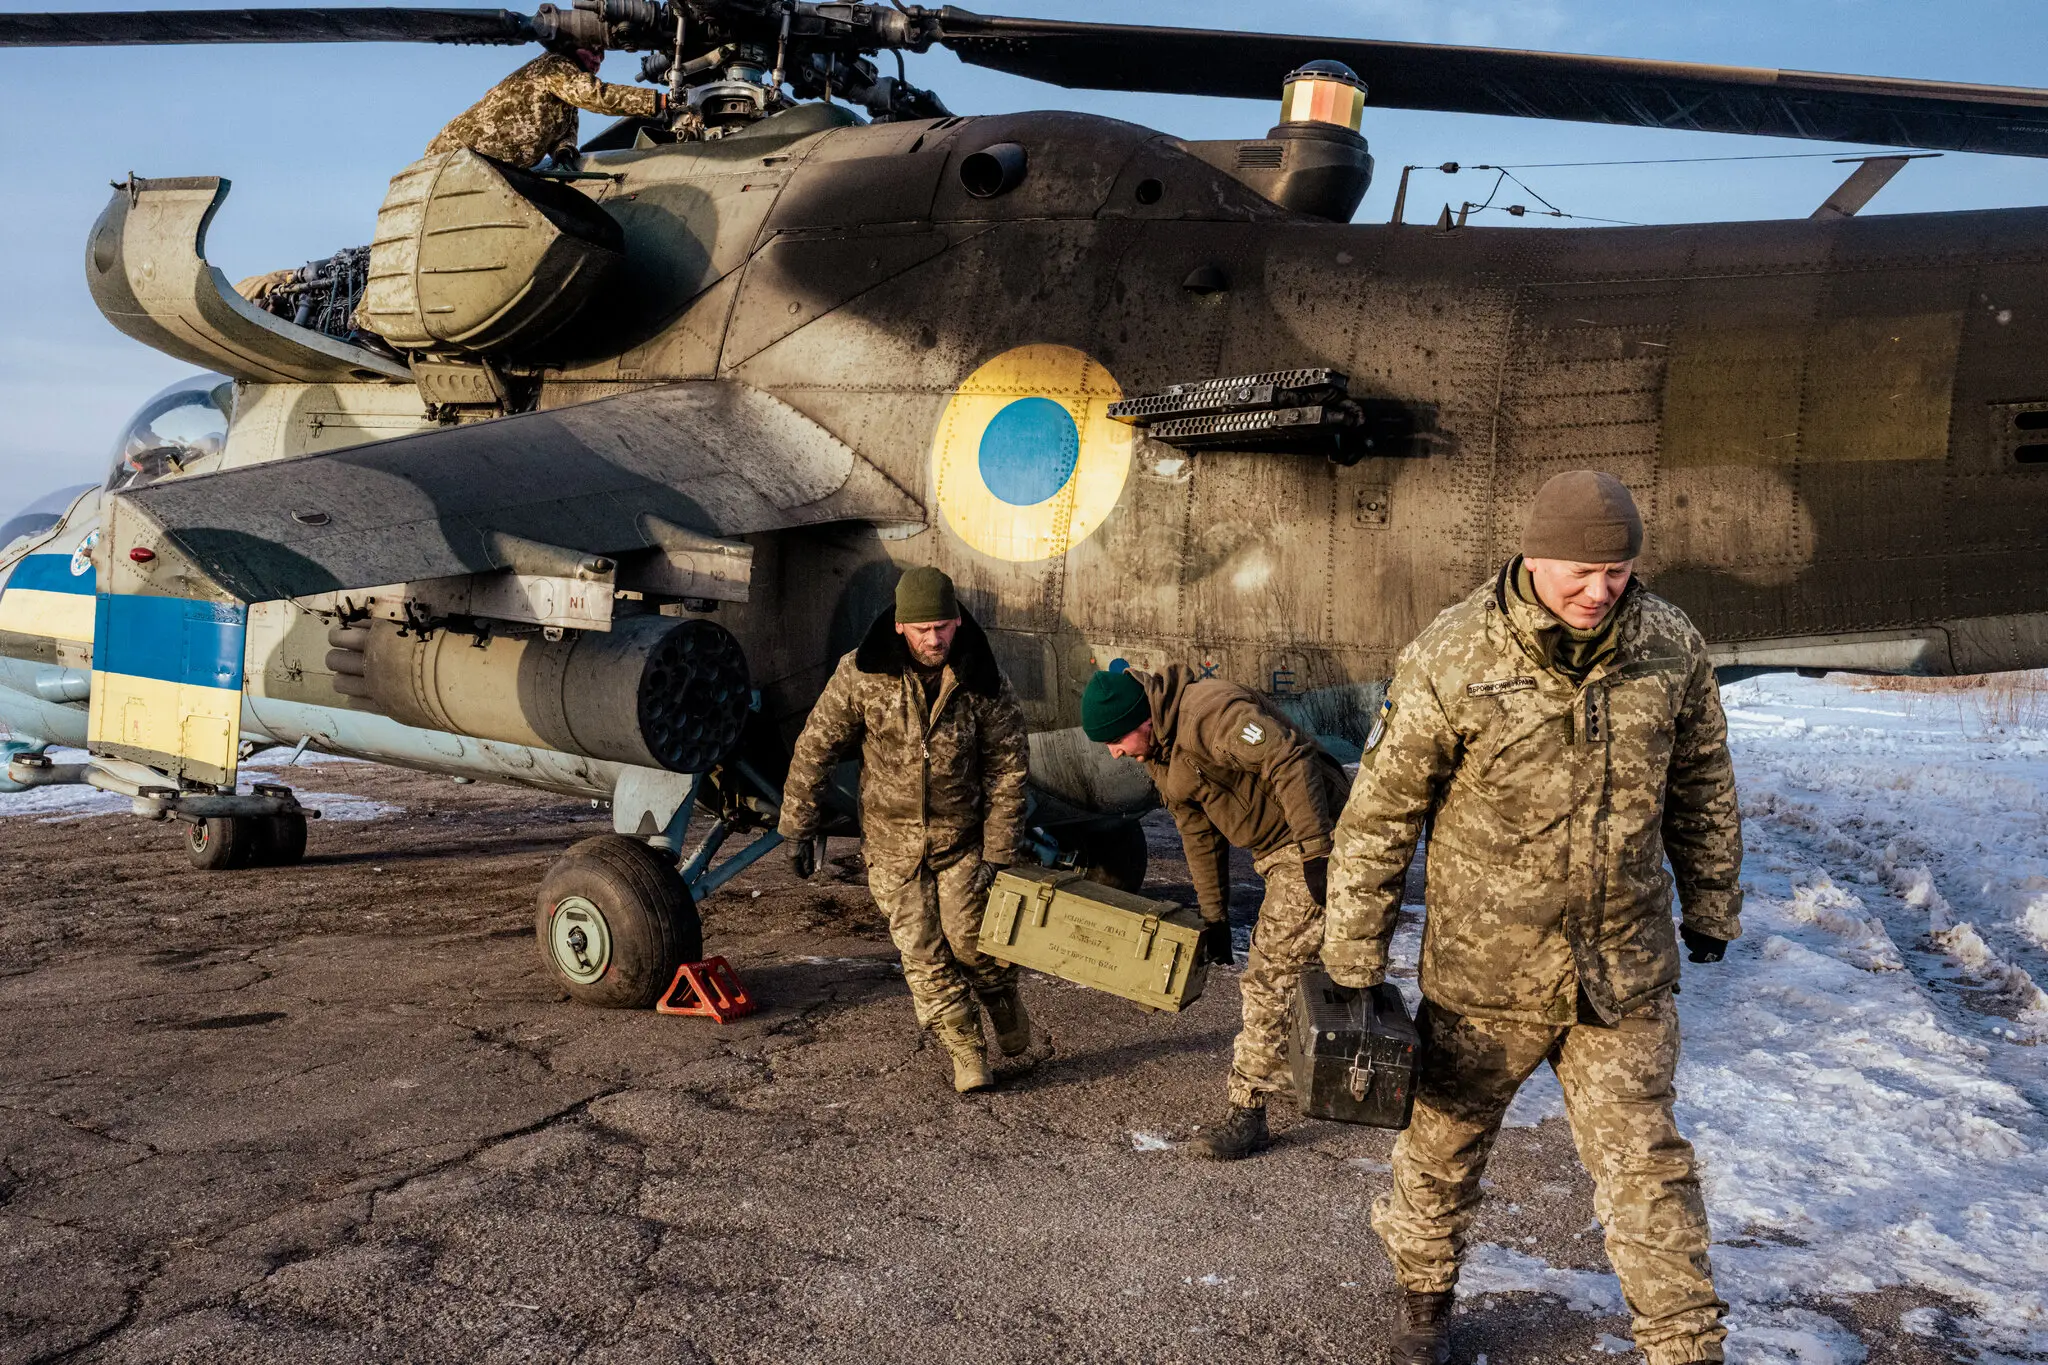 Ukrainian Mi-24P is being prepared for a combat sortie, spring 2023 / Illustrative photo credit: The New York Times